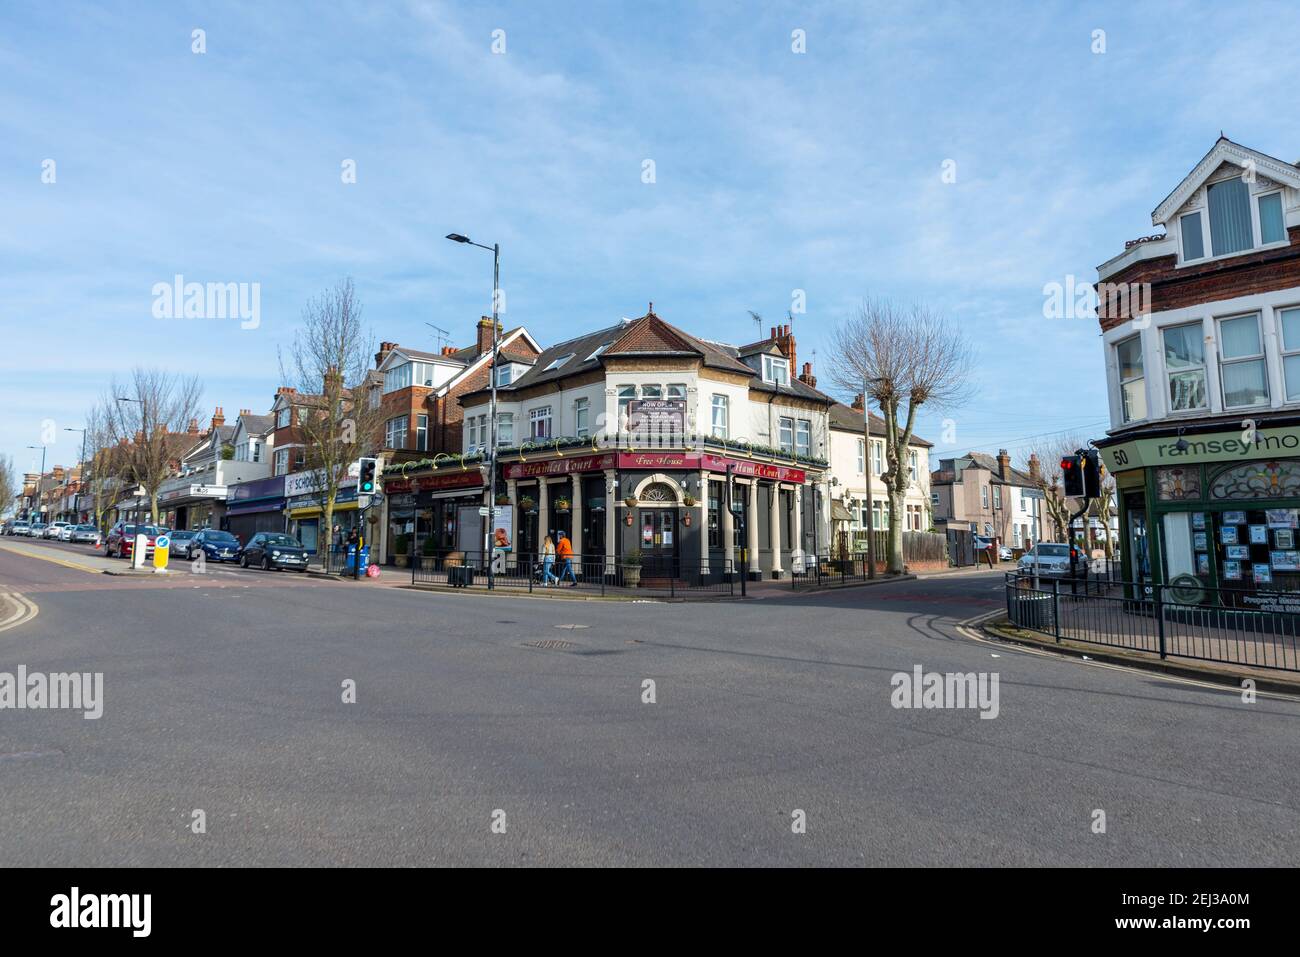 The Hamlet Court pub and crossroads in Hamlet Court Road, Westcliff on Sea, Essex, UK, during COVID 19 lockdown. Closed businesses Stock Photo